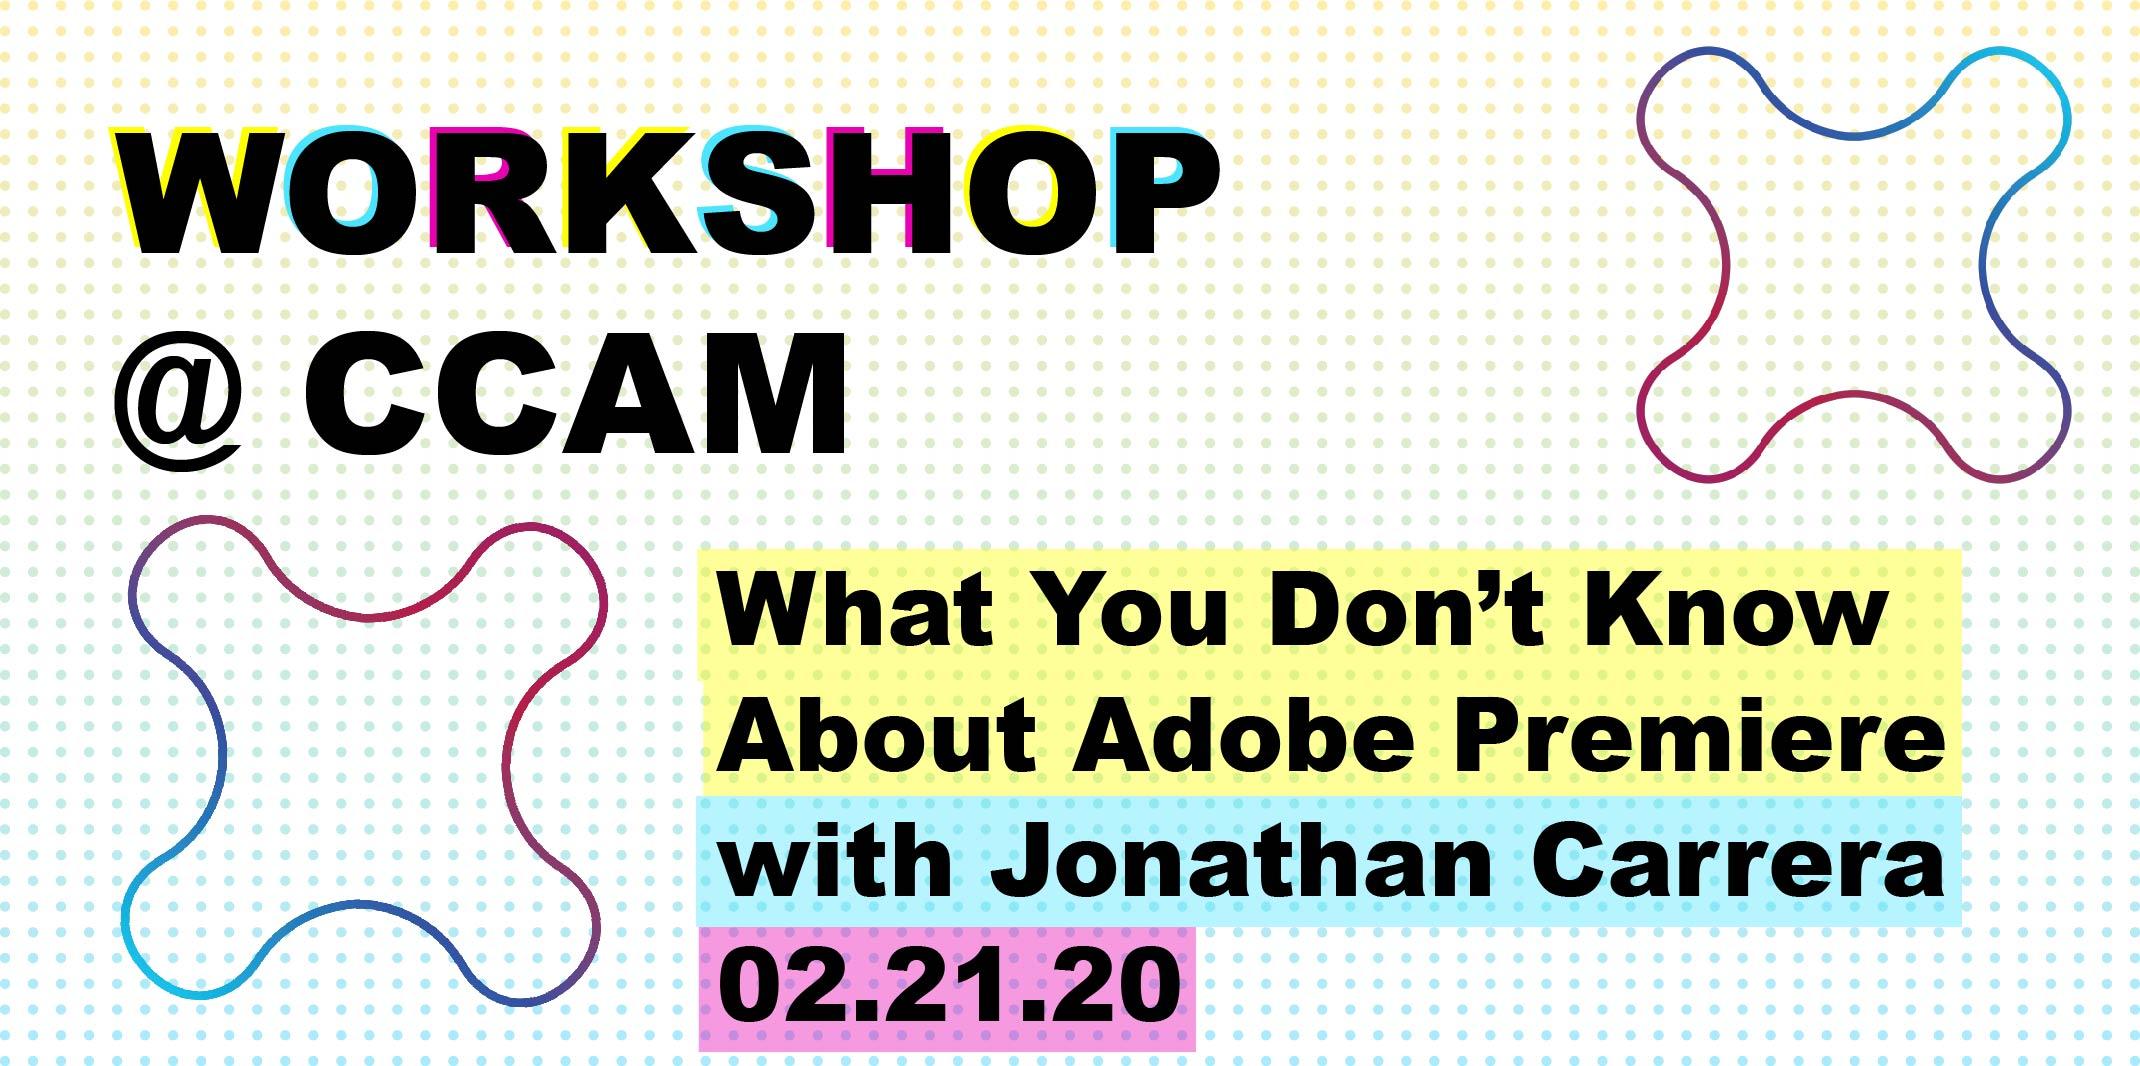 Workshop: What You Don't Know About Adobe Premiere